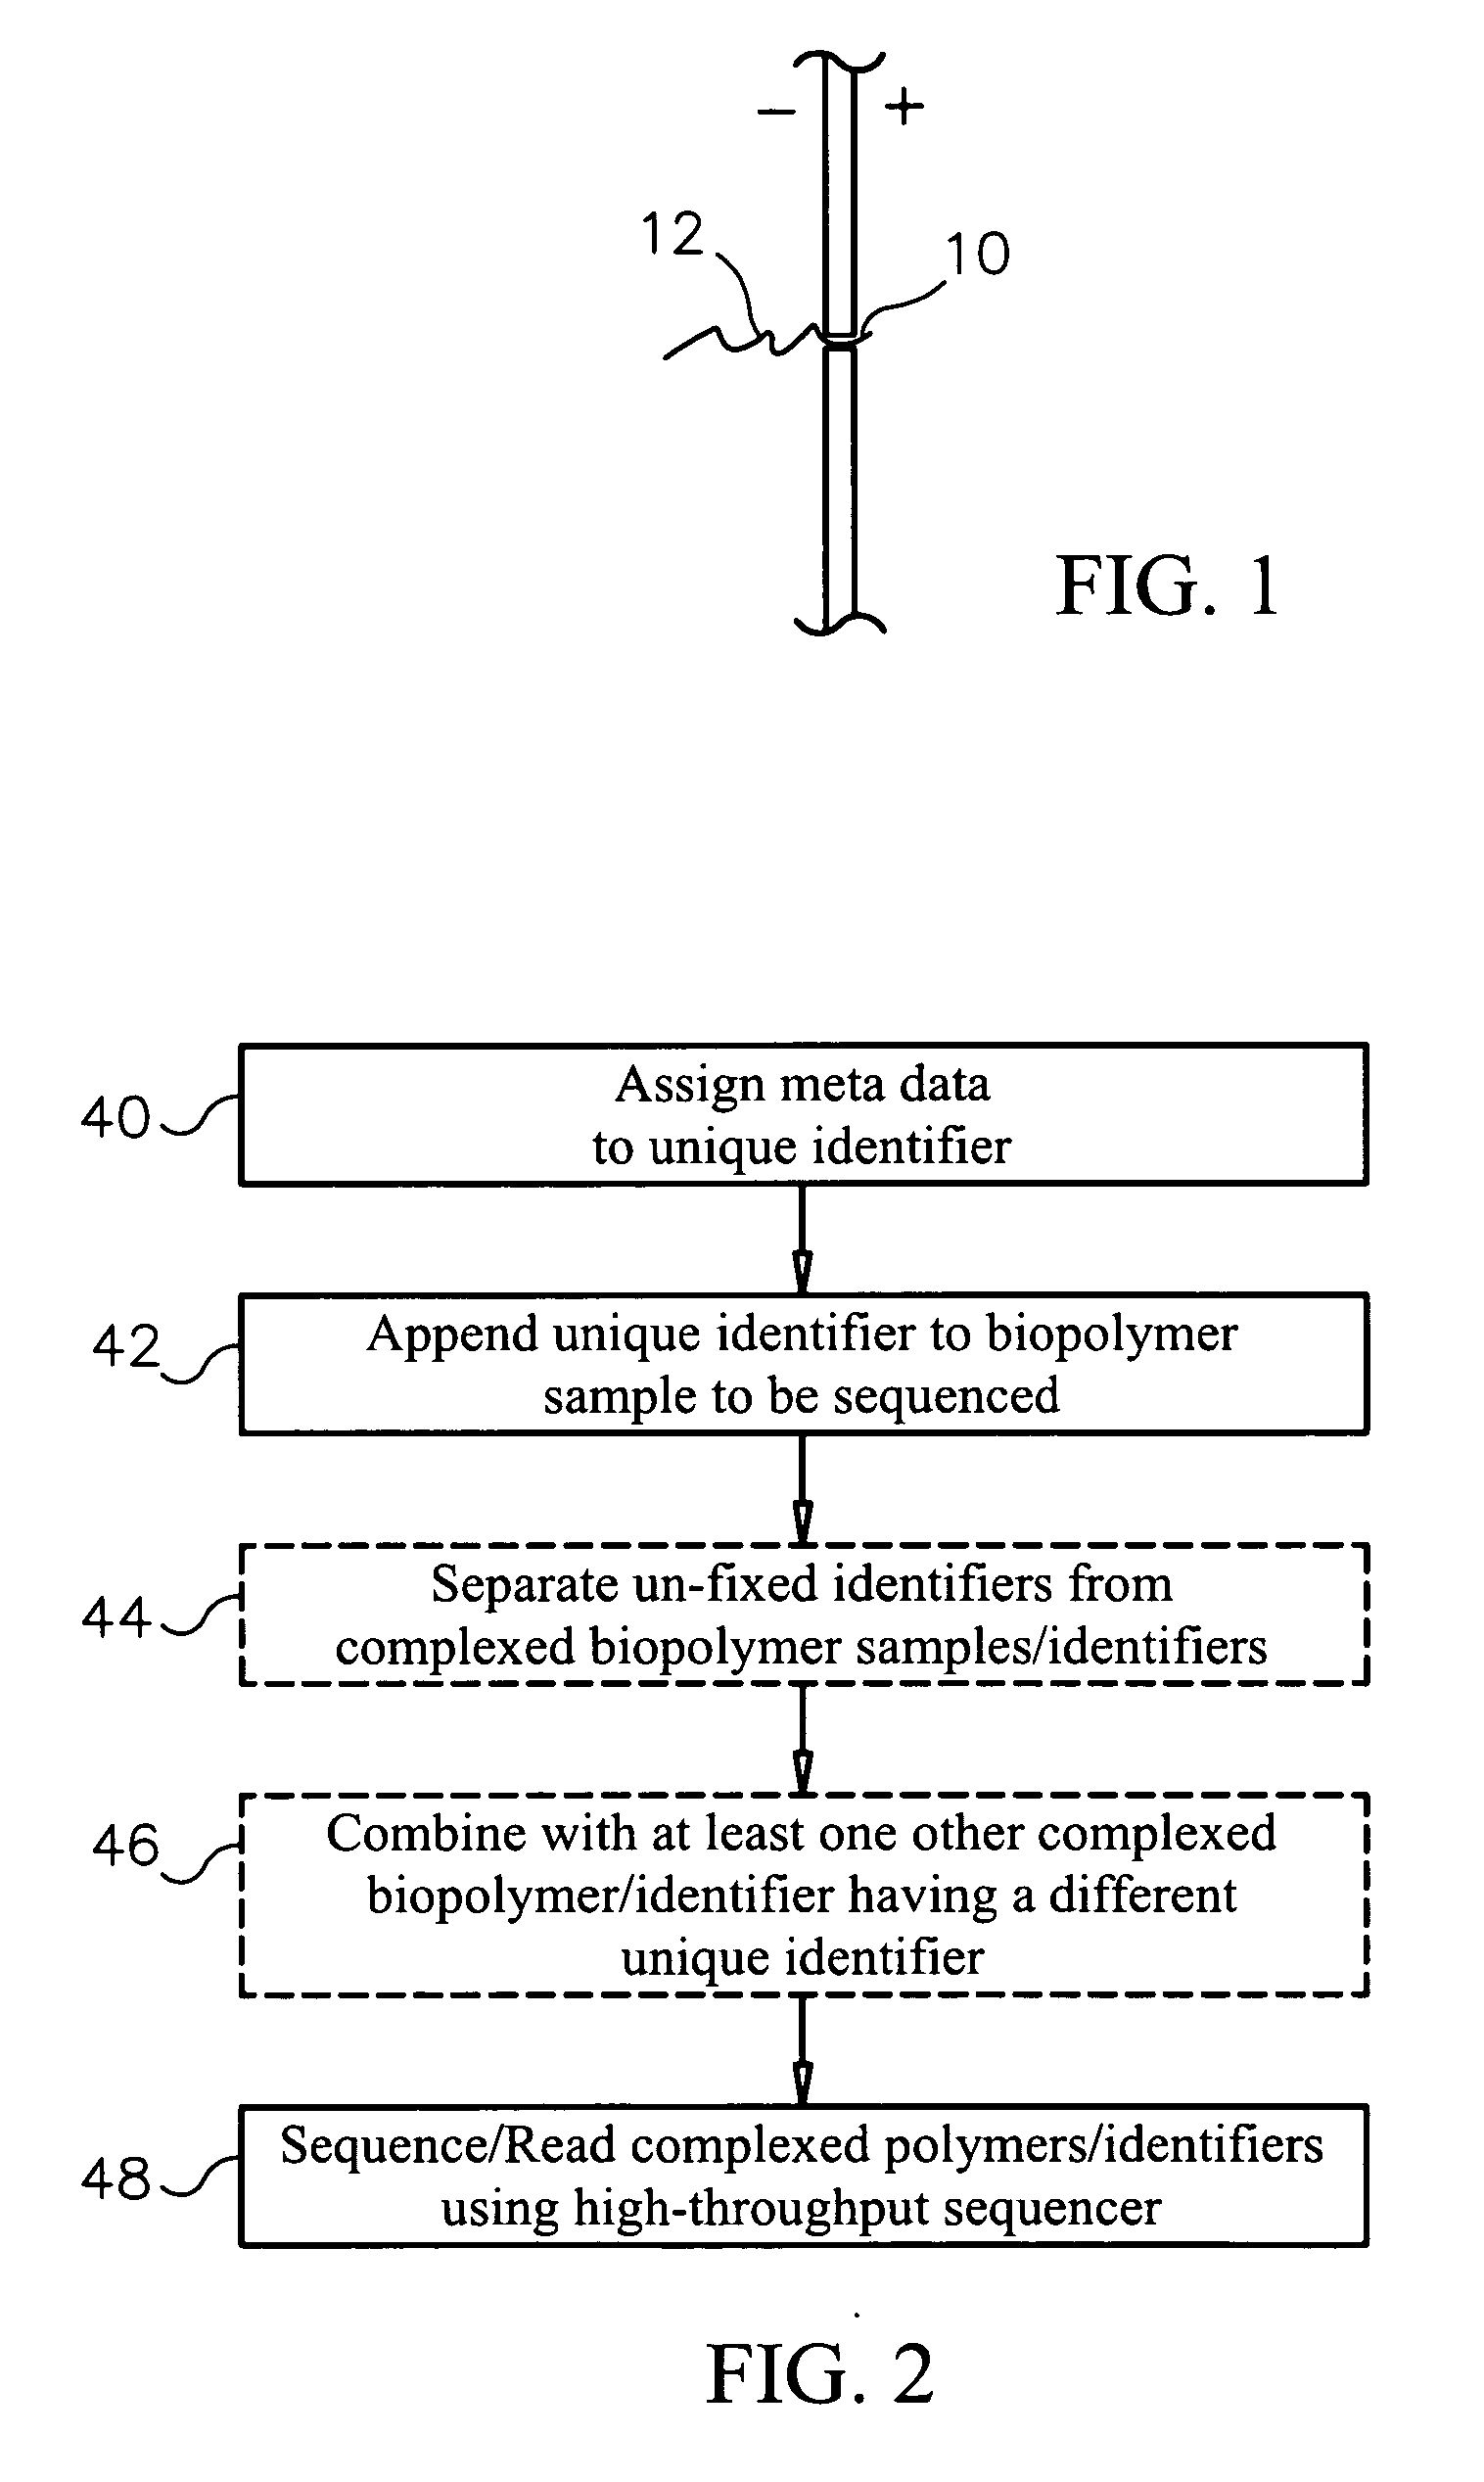 Unique identifiers for indicating properties associated with entities to which they are attached, and methods for using